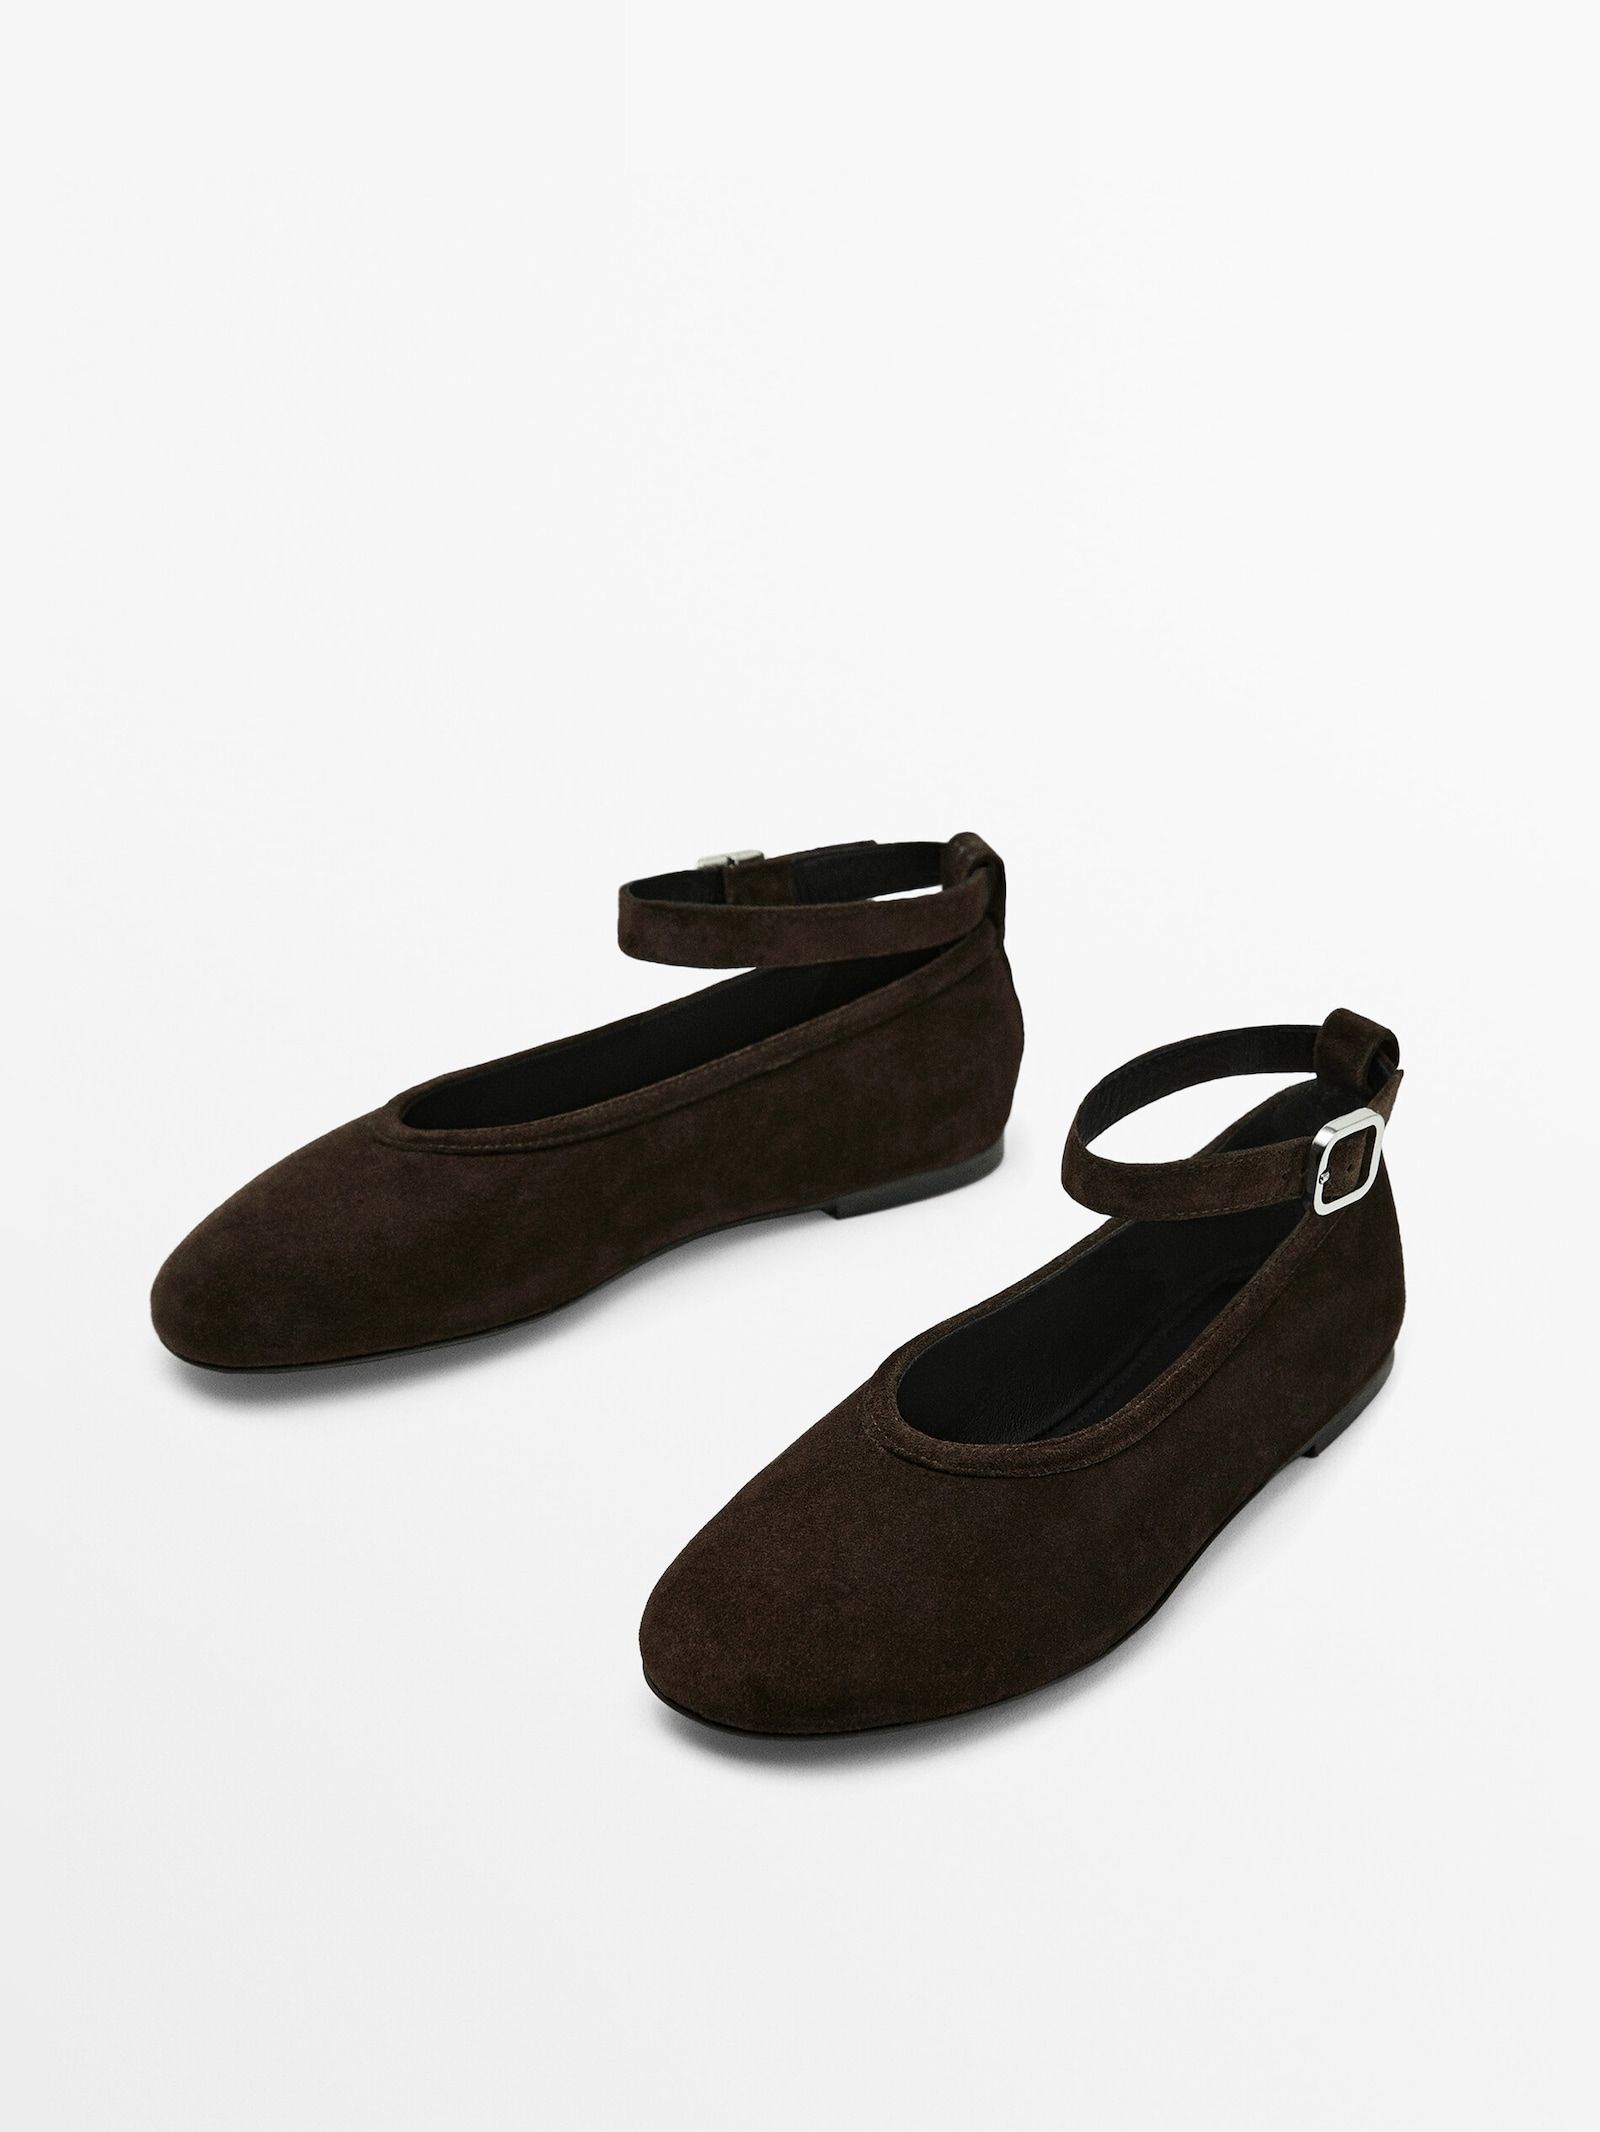 Ballet flats with detachable strap | Massimo Dutti (US)